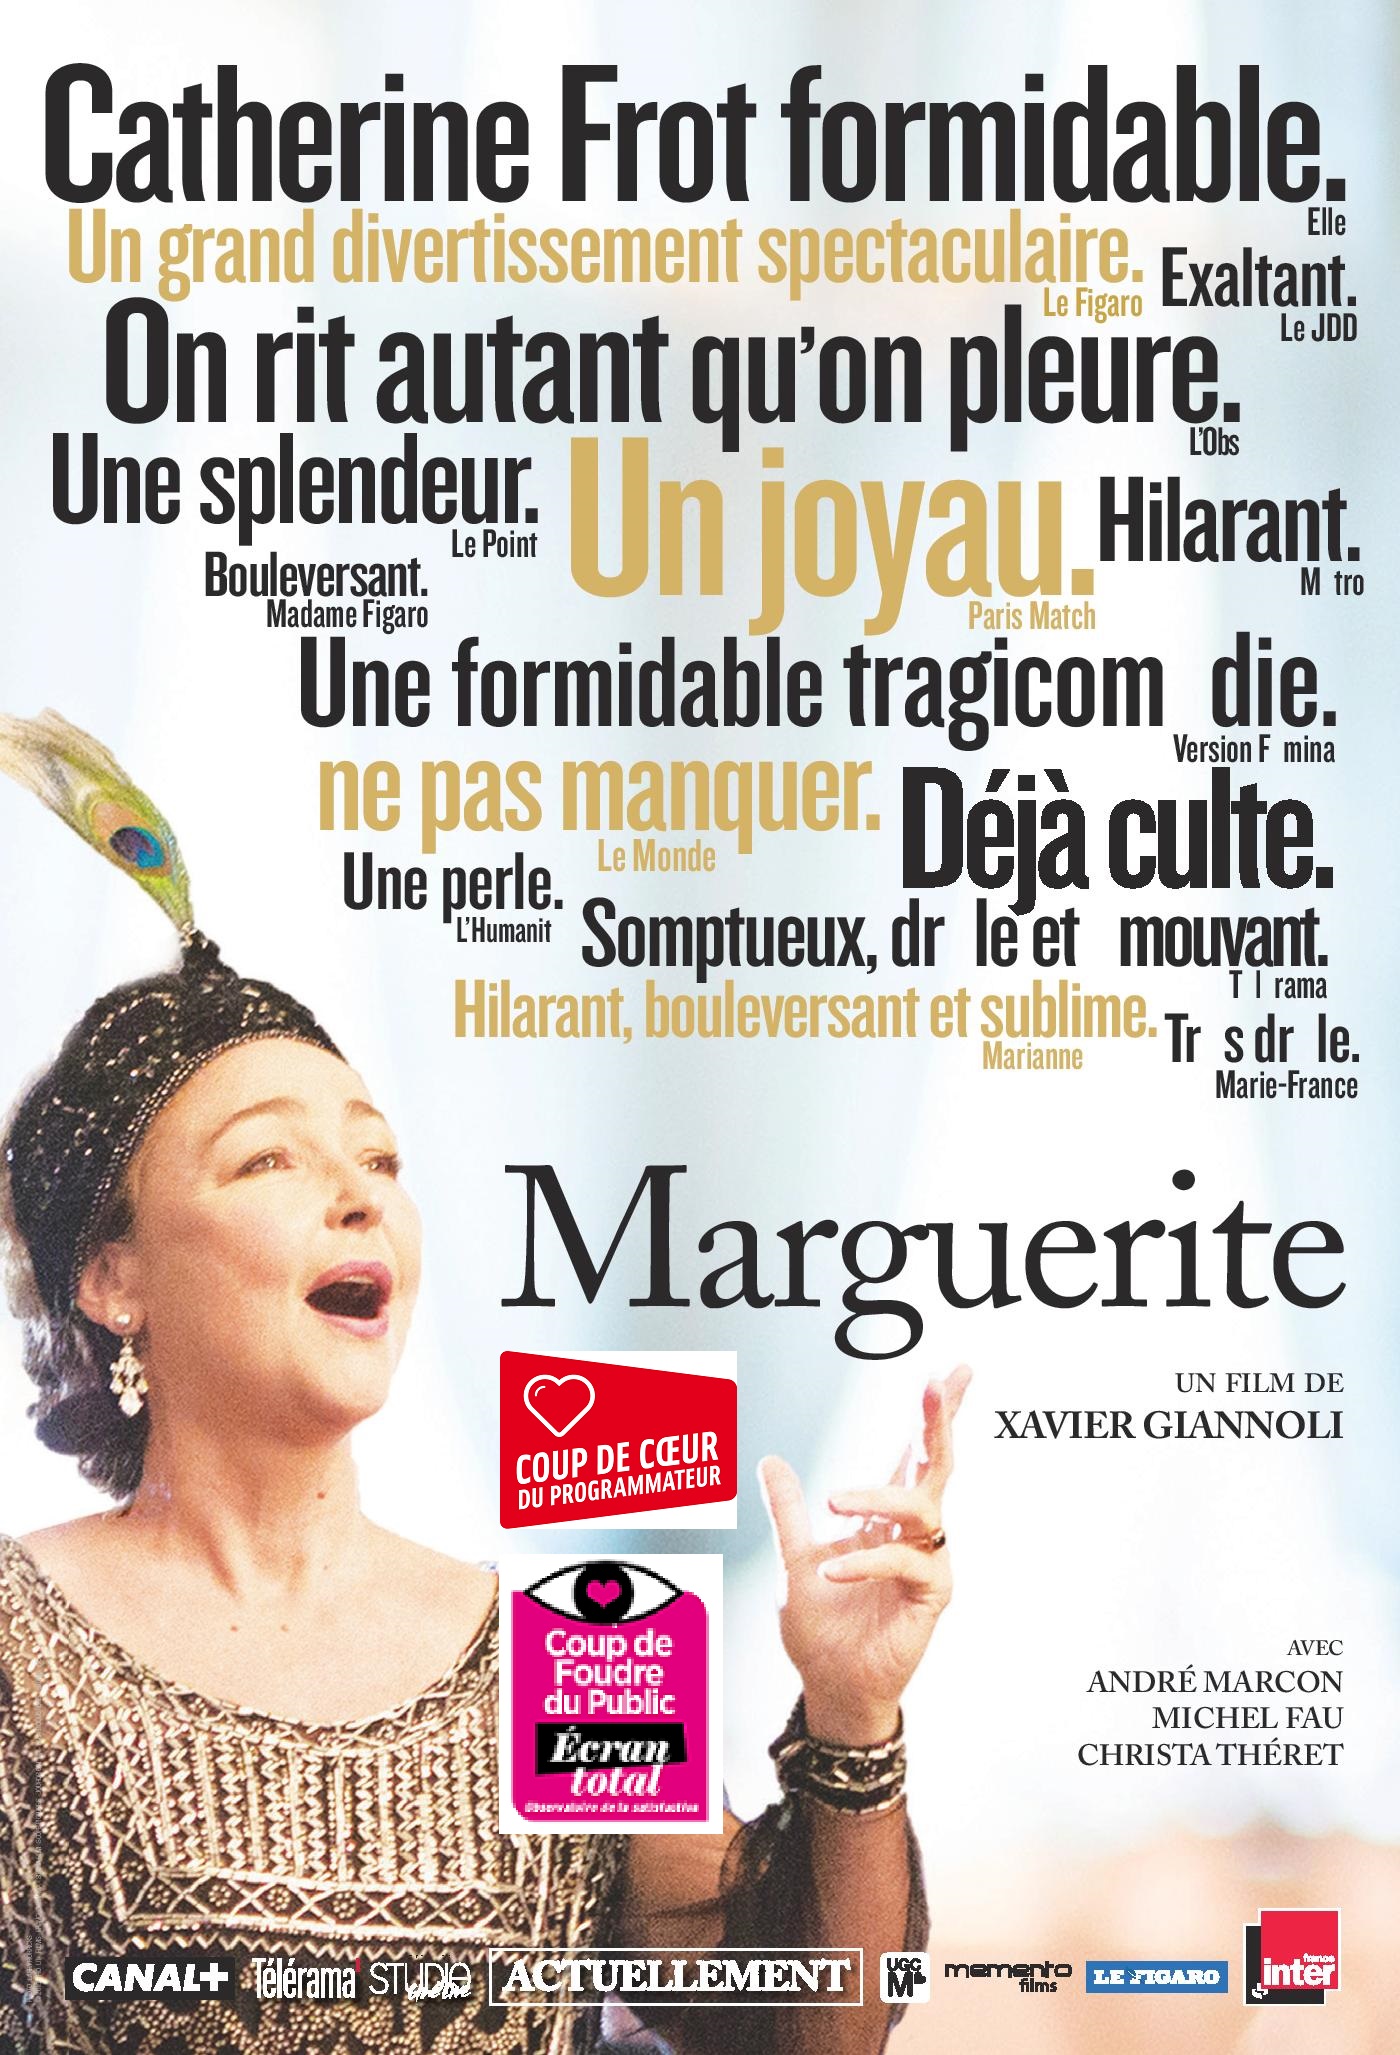 MARGUERITE_118,5x174_Campagne.Metro.Kiosques.depart23sept.BD.OK-page-001 labels site